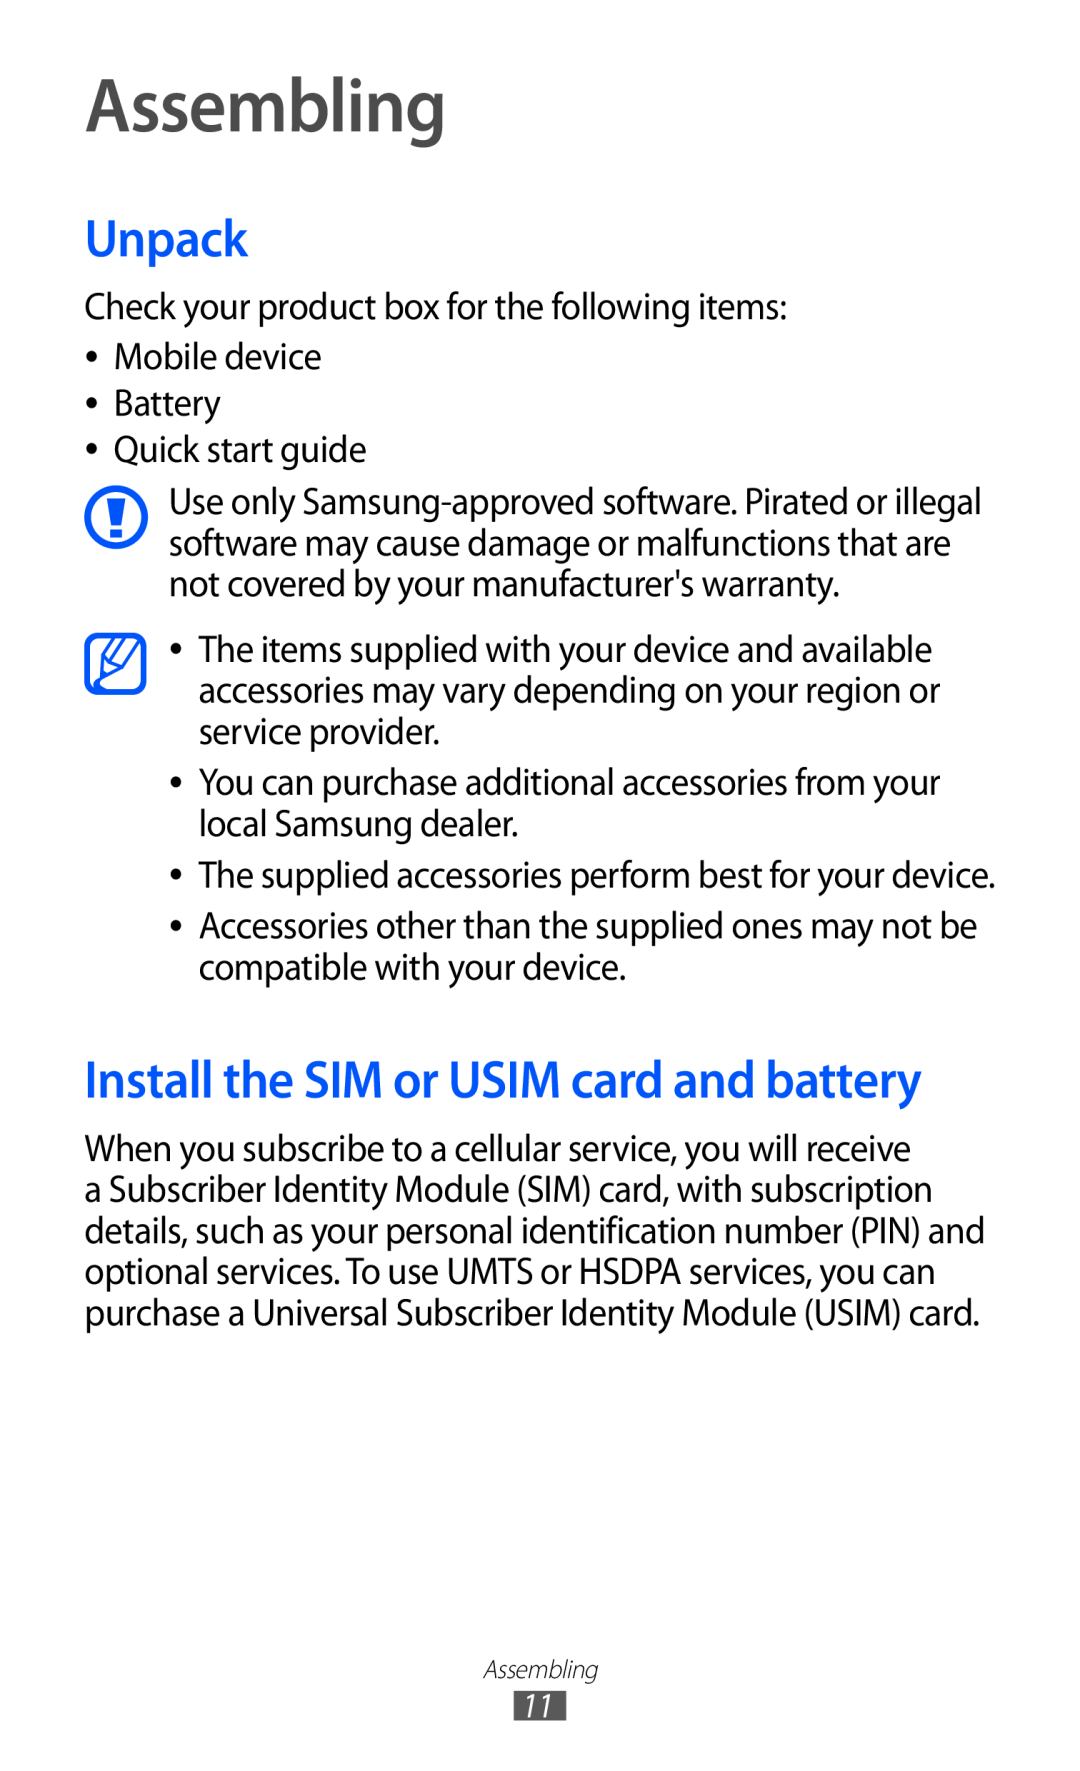 Samsung GT-I9070 user manual Assembling, Unpack, Install the SIM or USIM card and battery 